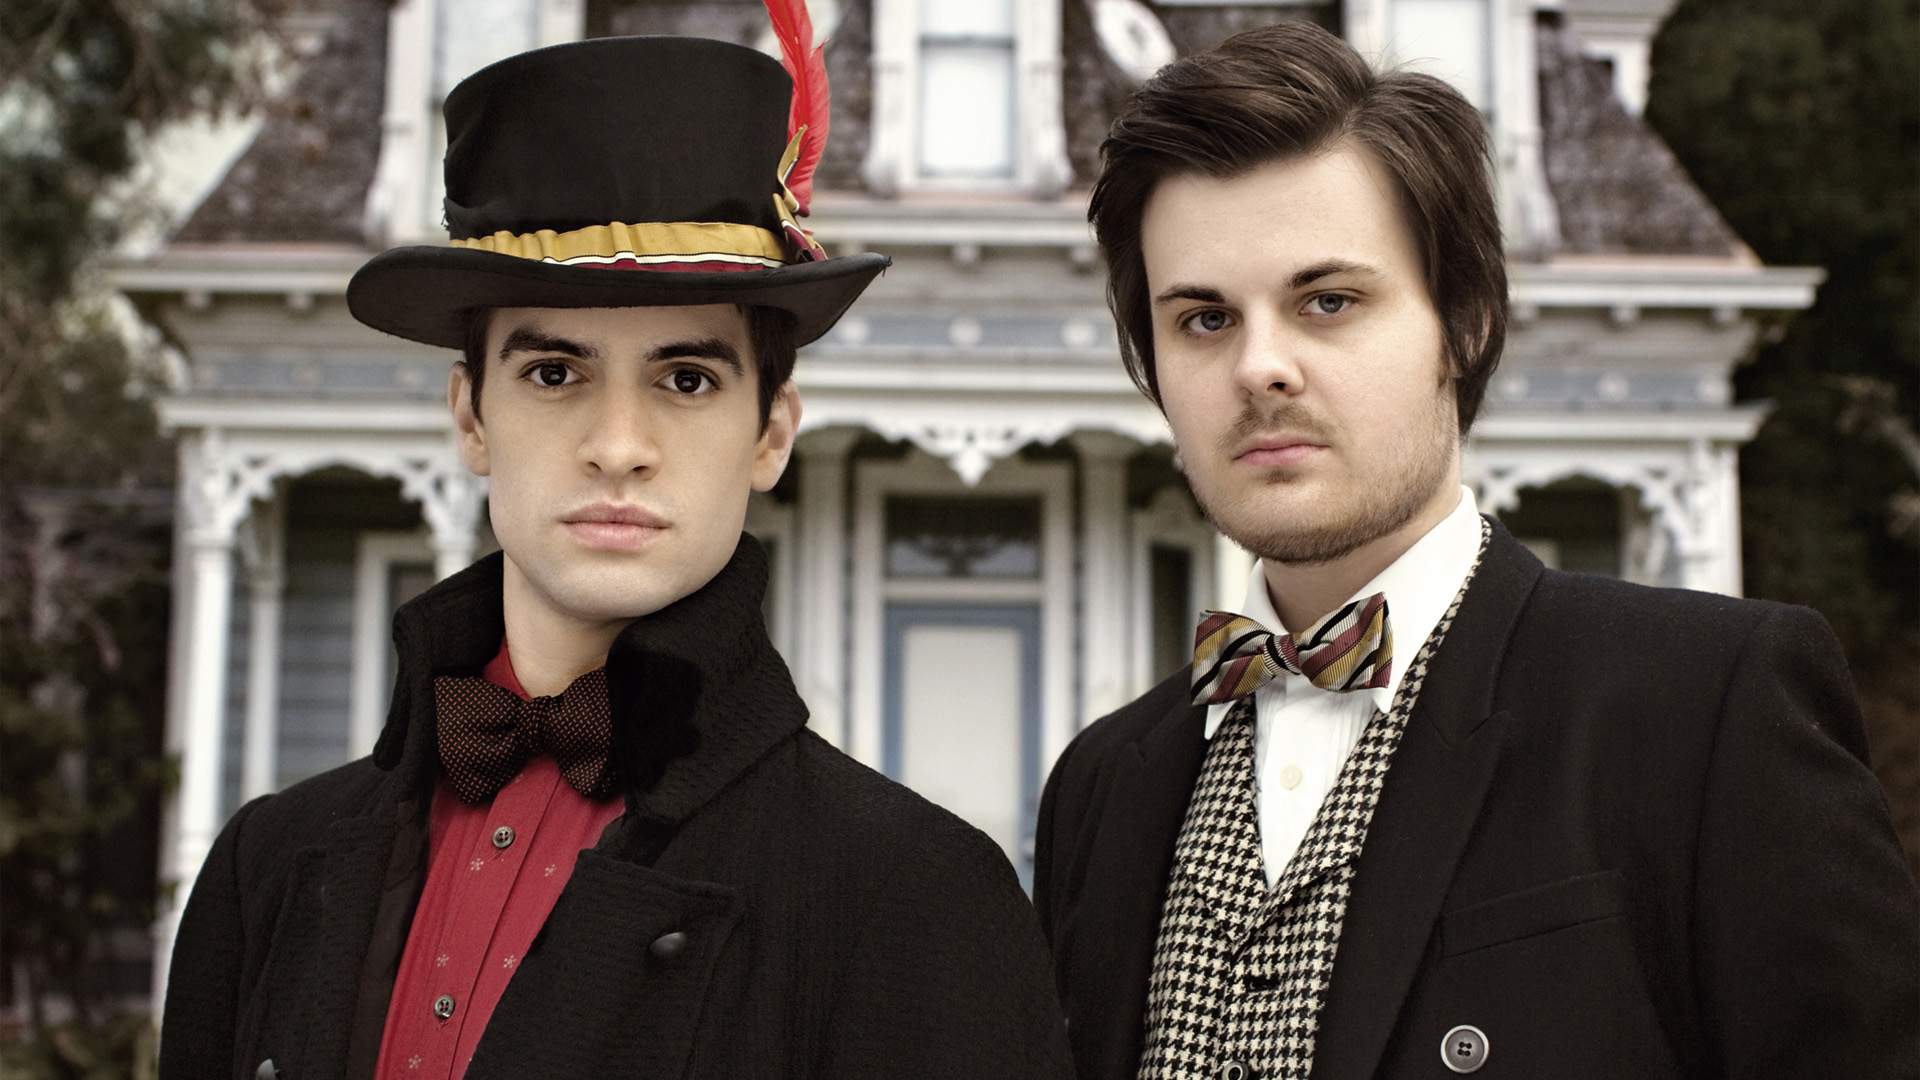 Panic! at the Disco tour dates 2017. Concerts, Tickets, Music